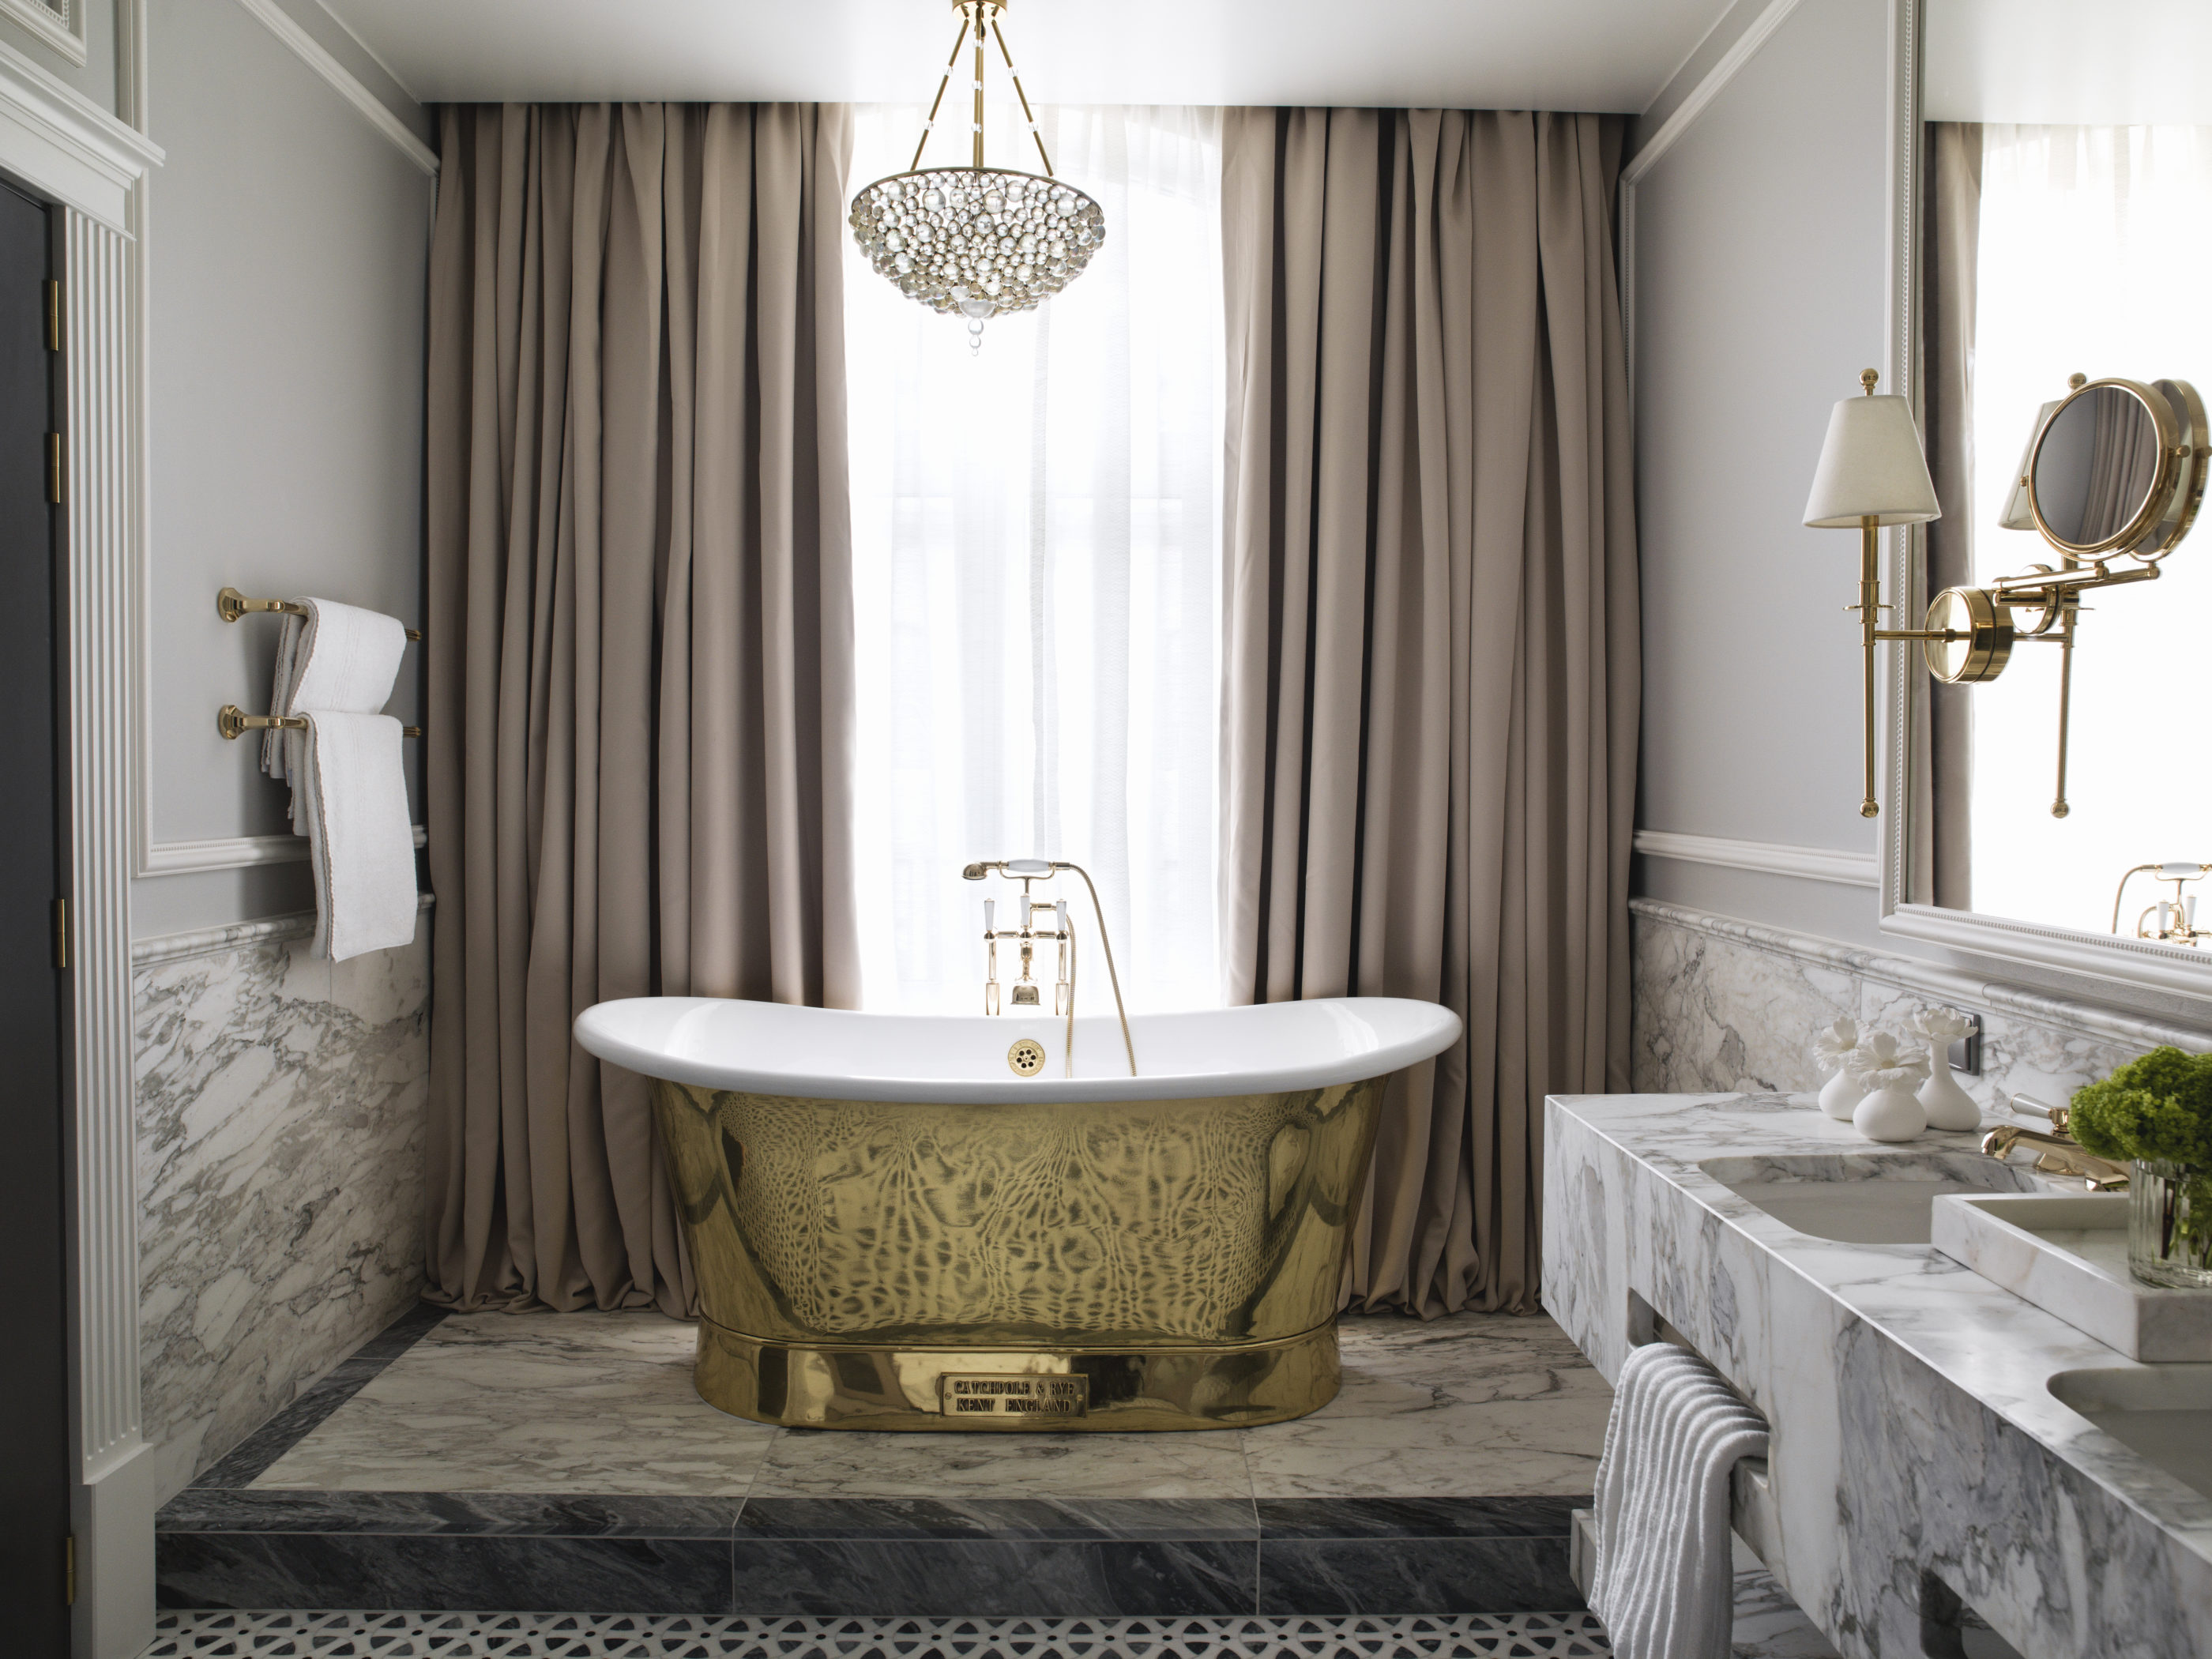 Unique hotel suite in Trondheim with marble bathroom and gold bathub